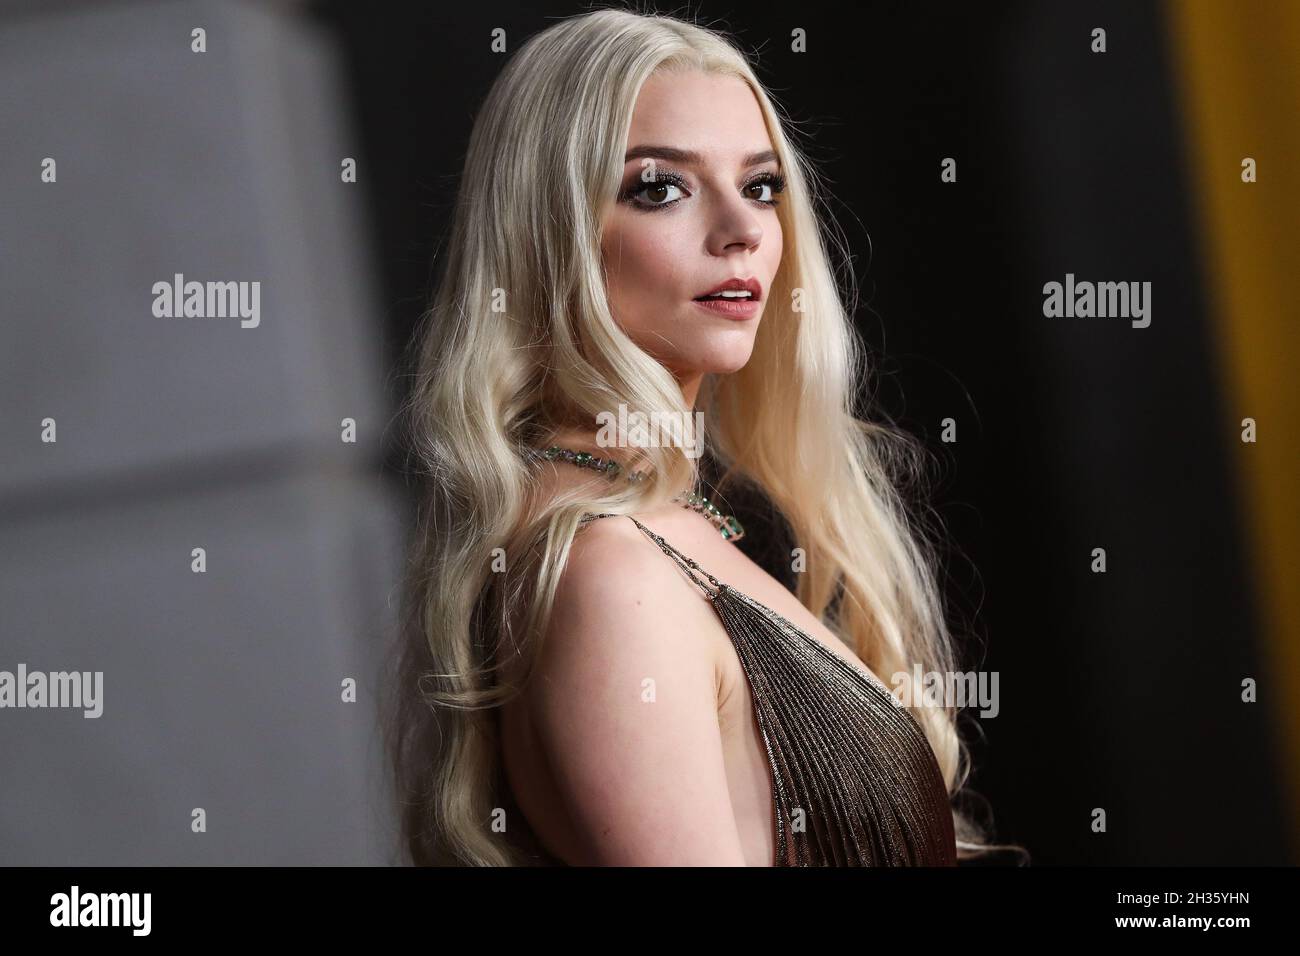 LOS ANGELES, CALIFORNIA, USA - OCTOBER 25: Actress Anya Taylor-Joy wearing a Dior gown arrives at the Los Angeles Premiere Of Focus Features' 'Last Night In Soho' held at the Academy Museum of Motion Pictures on October 25, 2021 in Los Angeles, California, United States. (Photo by Xavier Collin/Image Press Agency) Stock Photo